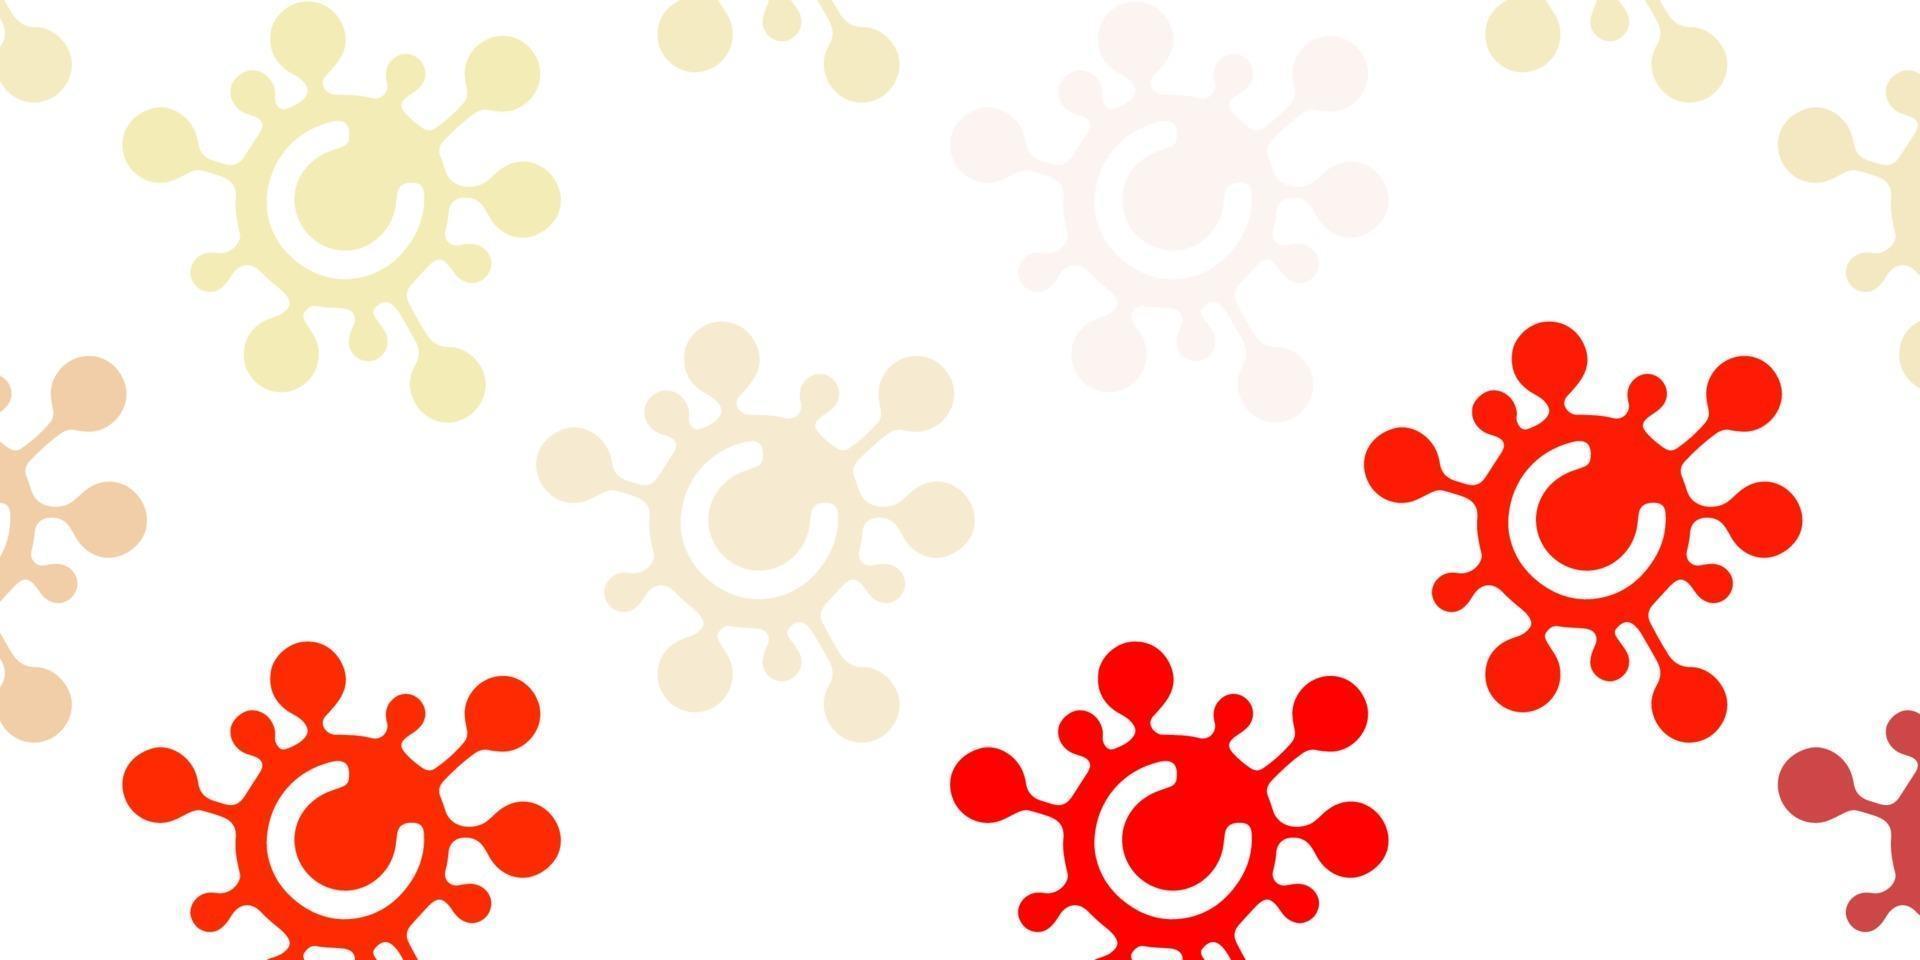 Light Red, Yellow vector texture with disease symbols.